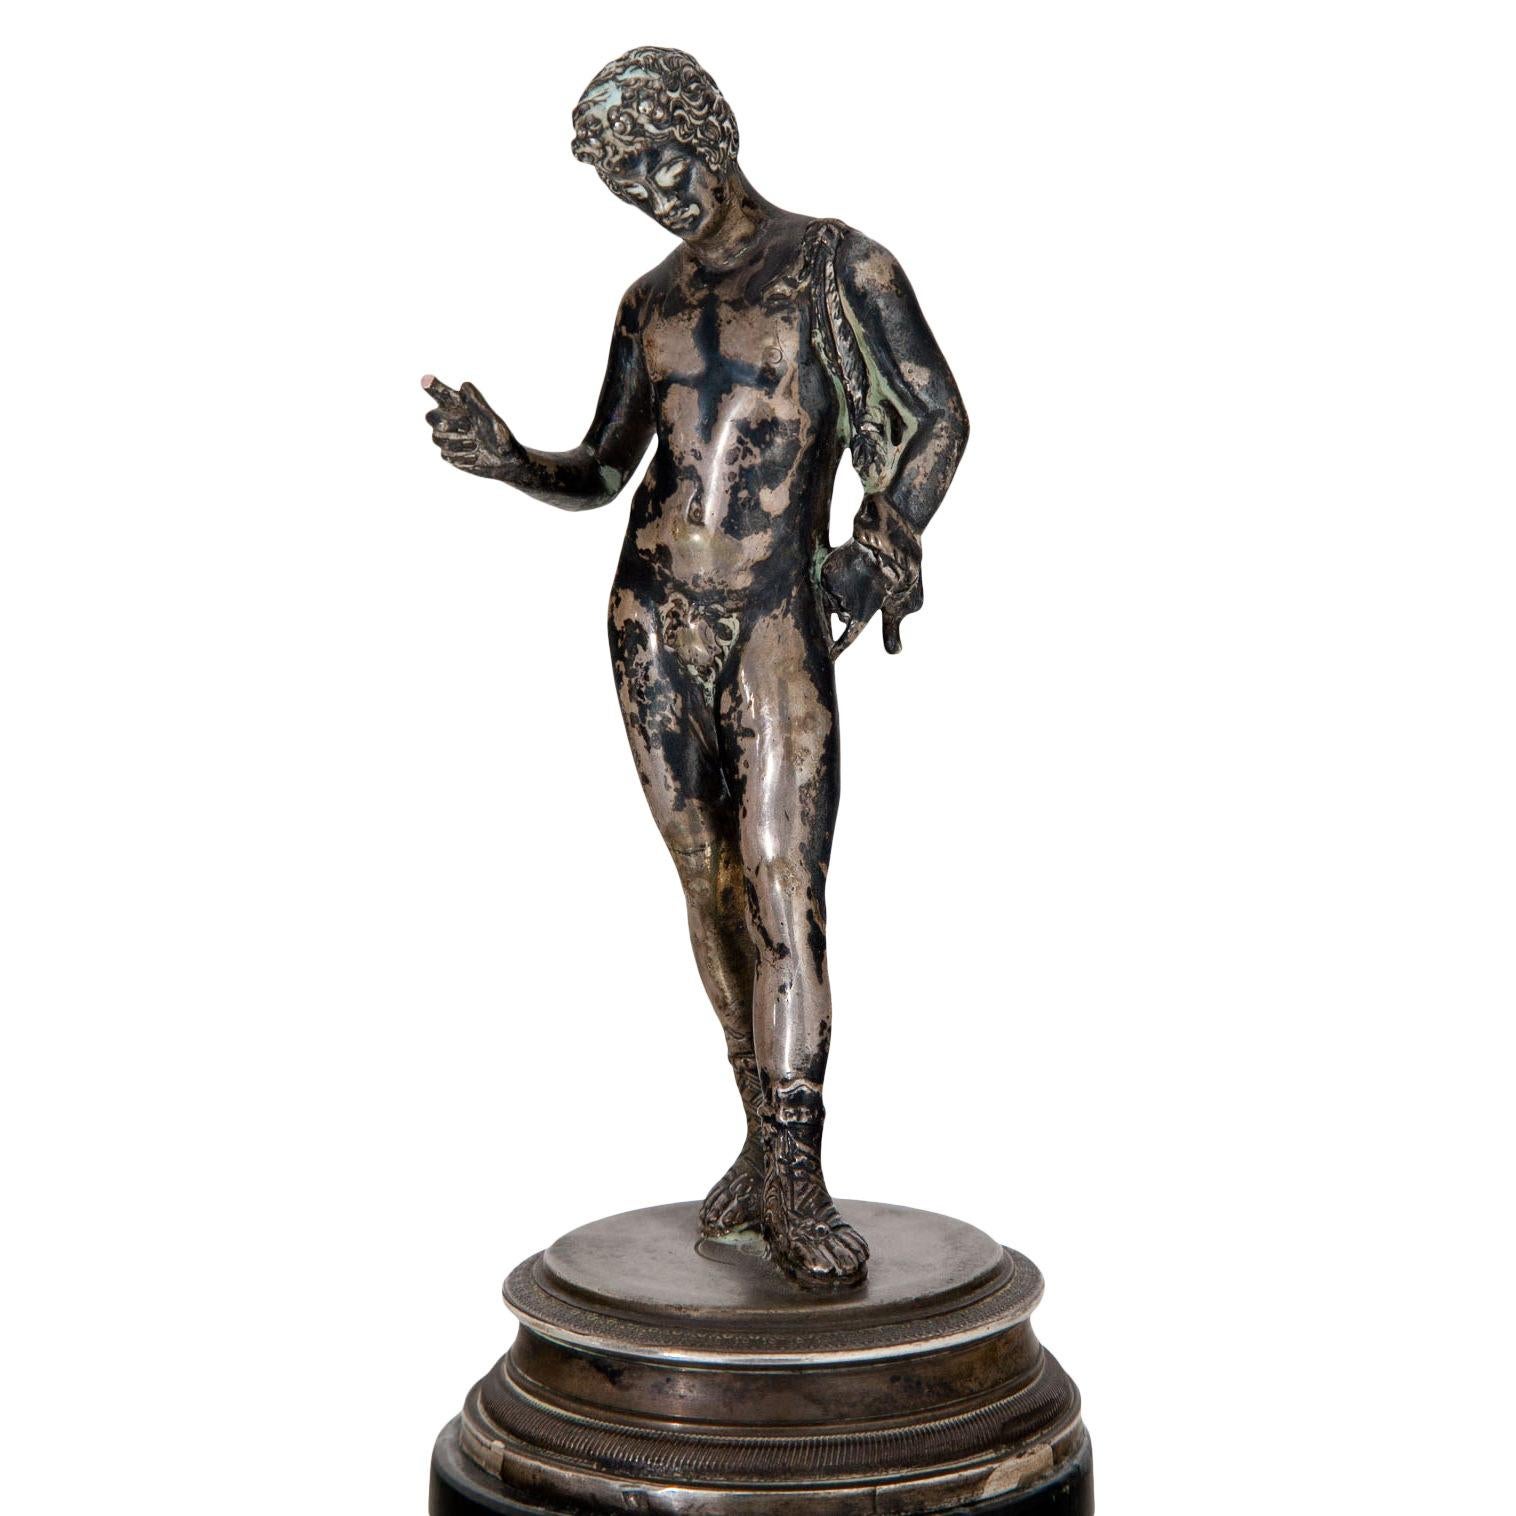 Figure of Narcissus after the famous sculpture in the Museo Nazionale in Naples, standing on a black and beige stone base. Silver, marked at the base. The stone plinth and the index finger are damaged.